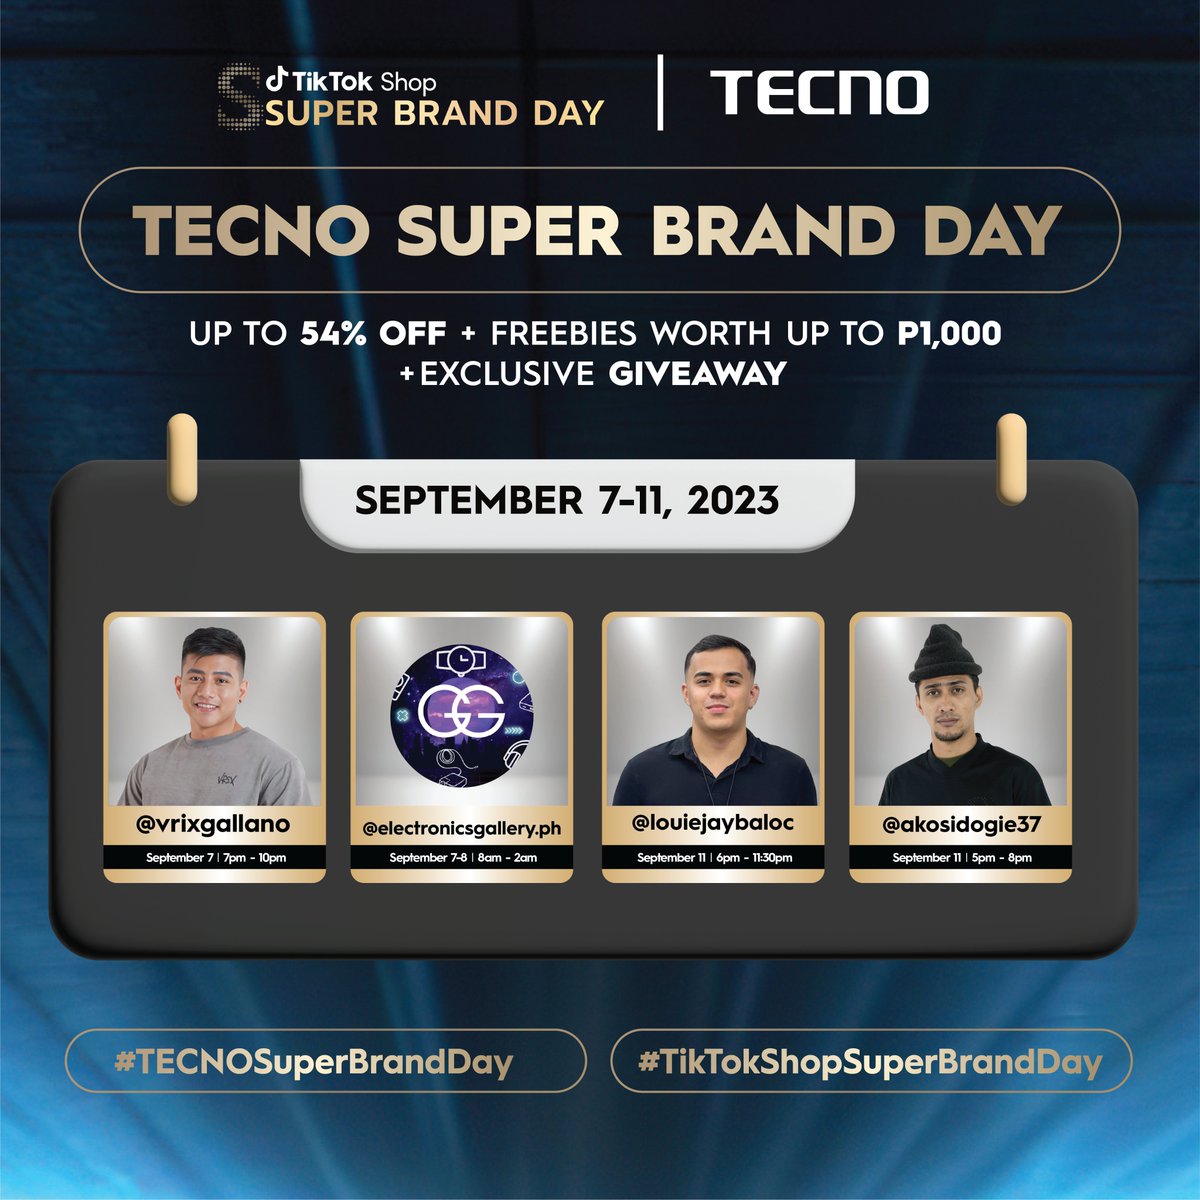 Who's excited about the upcoming TECNO Super Brand Day Sale? Stay tuned for the big discounts and check out the livestreams of our CGO and other TikTok influencers.

#TECNOSuperBrandDay #TikTokShopSuperBrandDay #TECNOPOVA5Series #CAMON20ProSeries #TECNOPhilippines